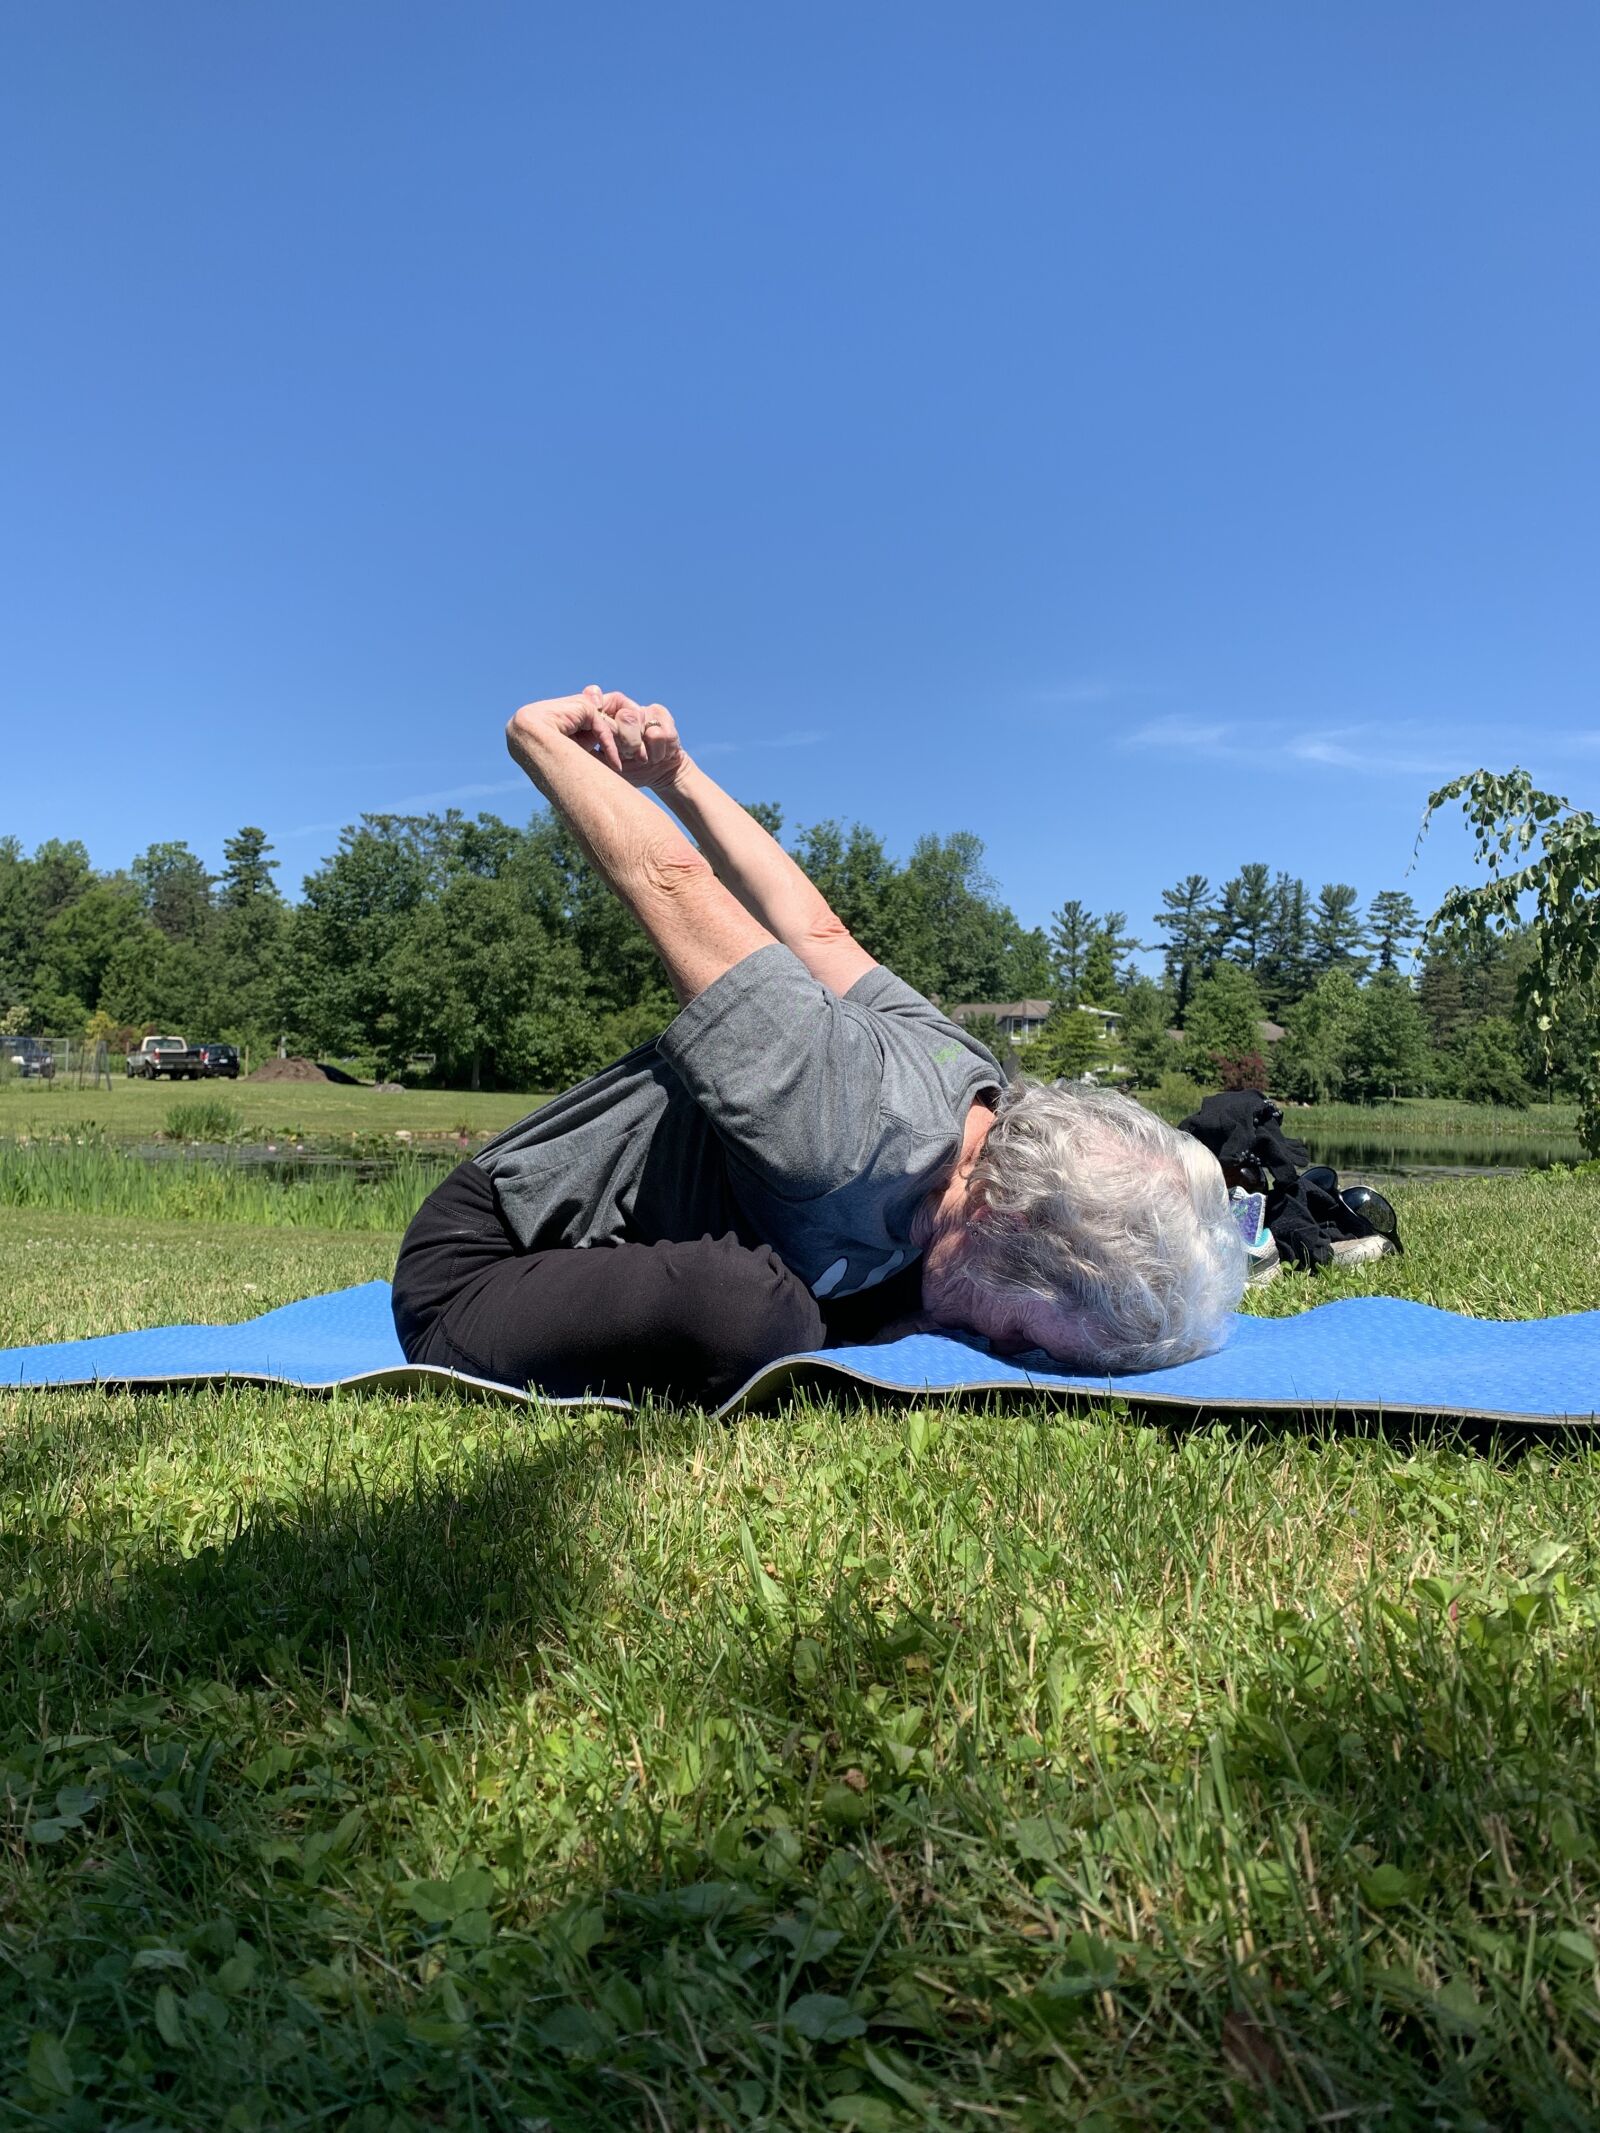 Apple iPhone XS sample photo. Outdoor yoga, exercise, body photography